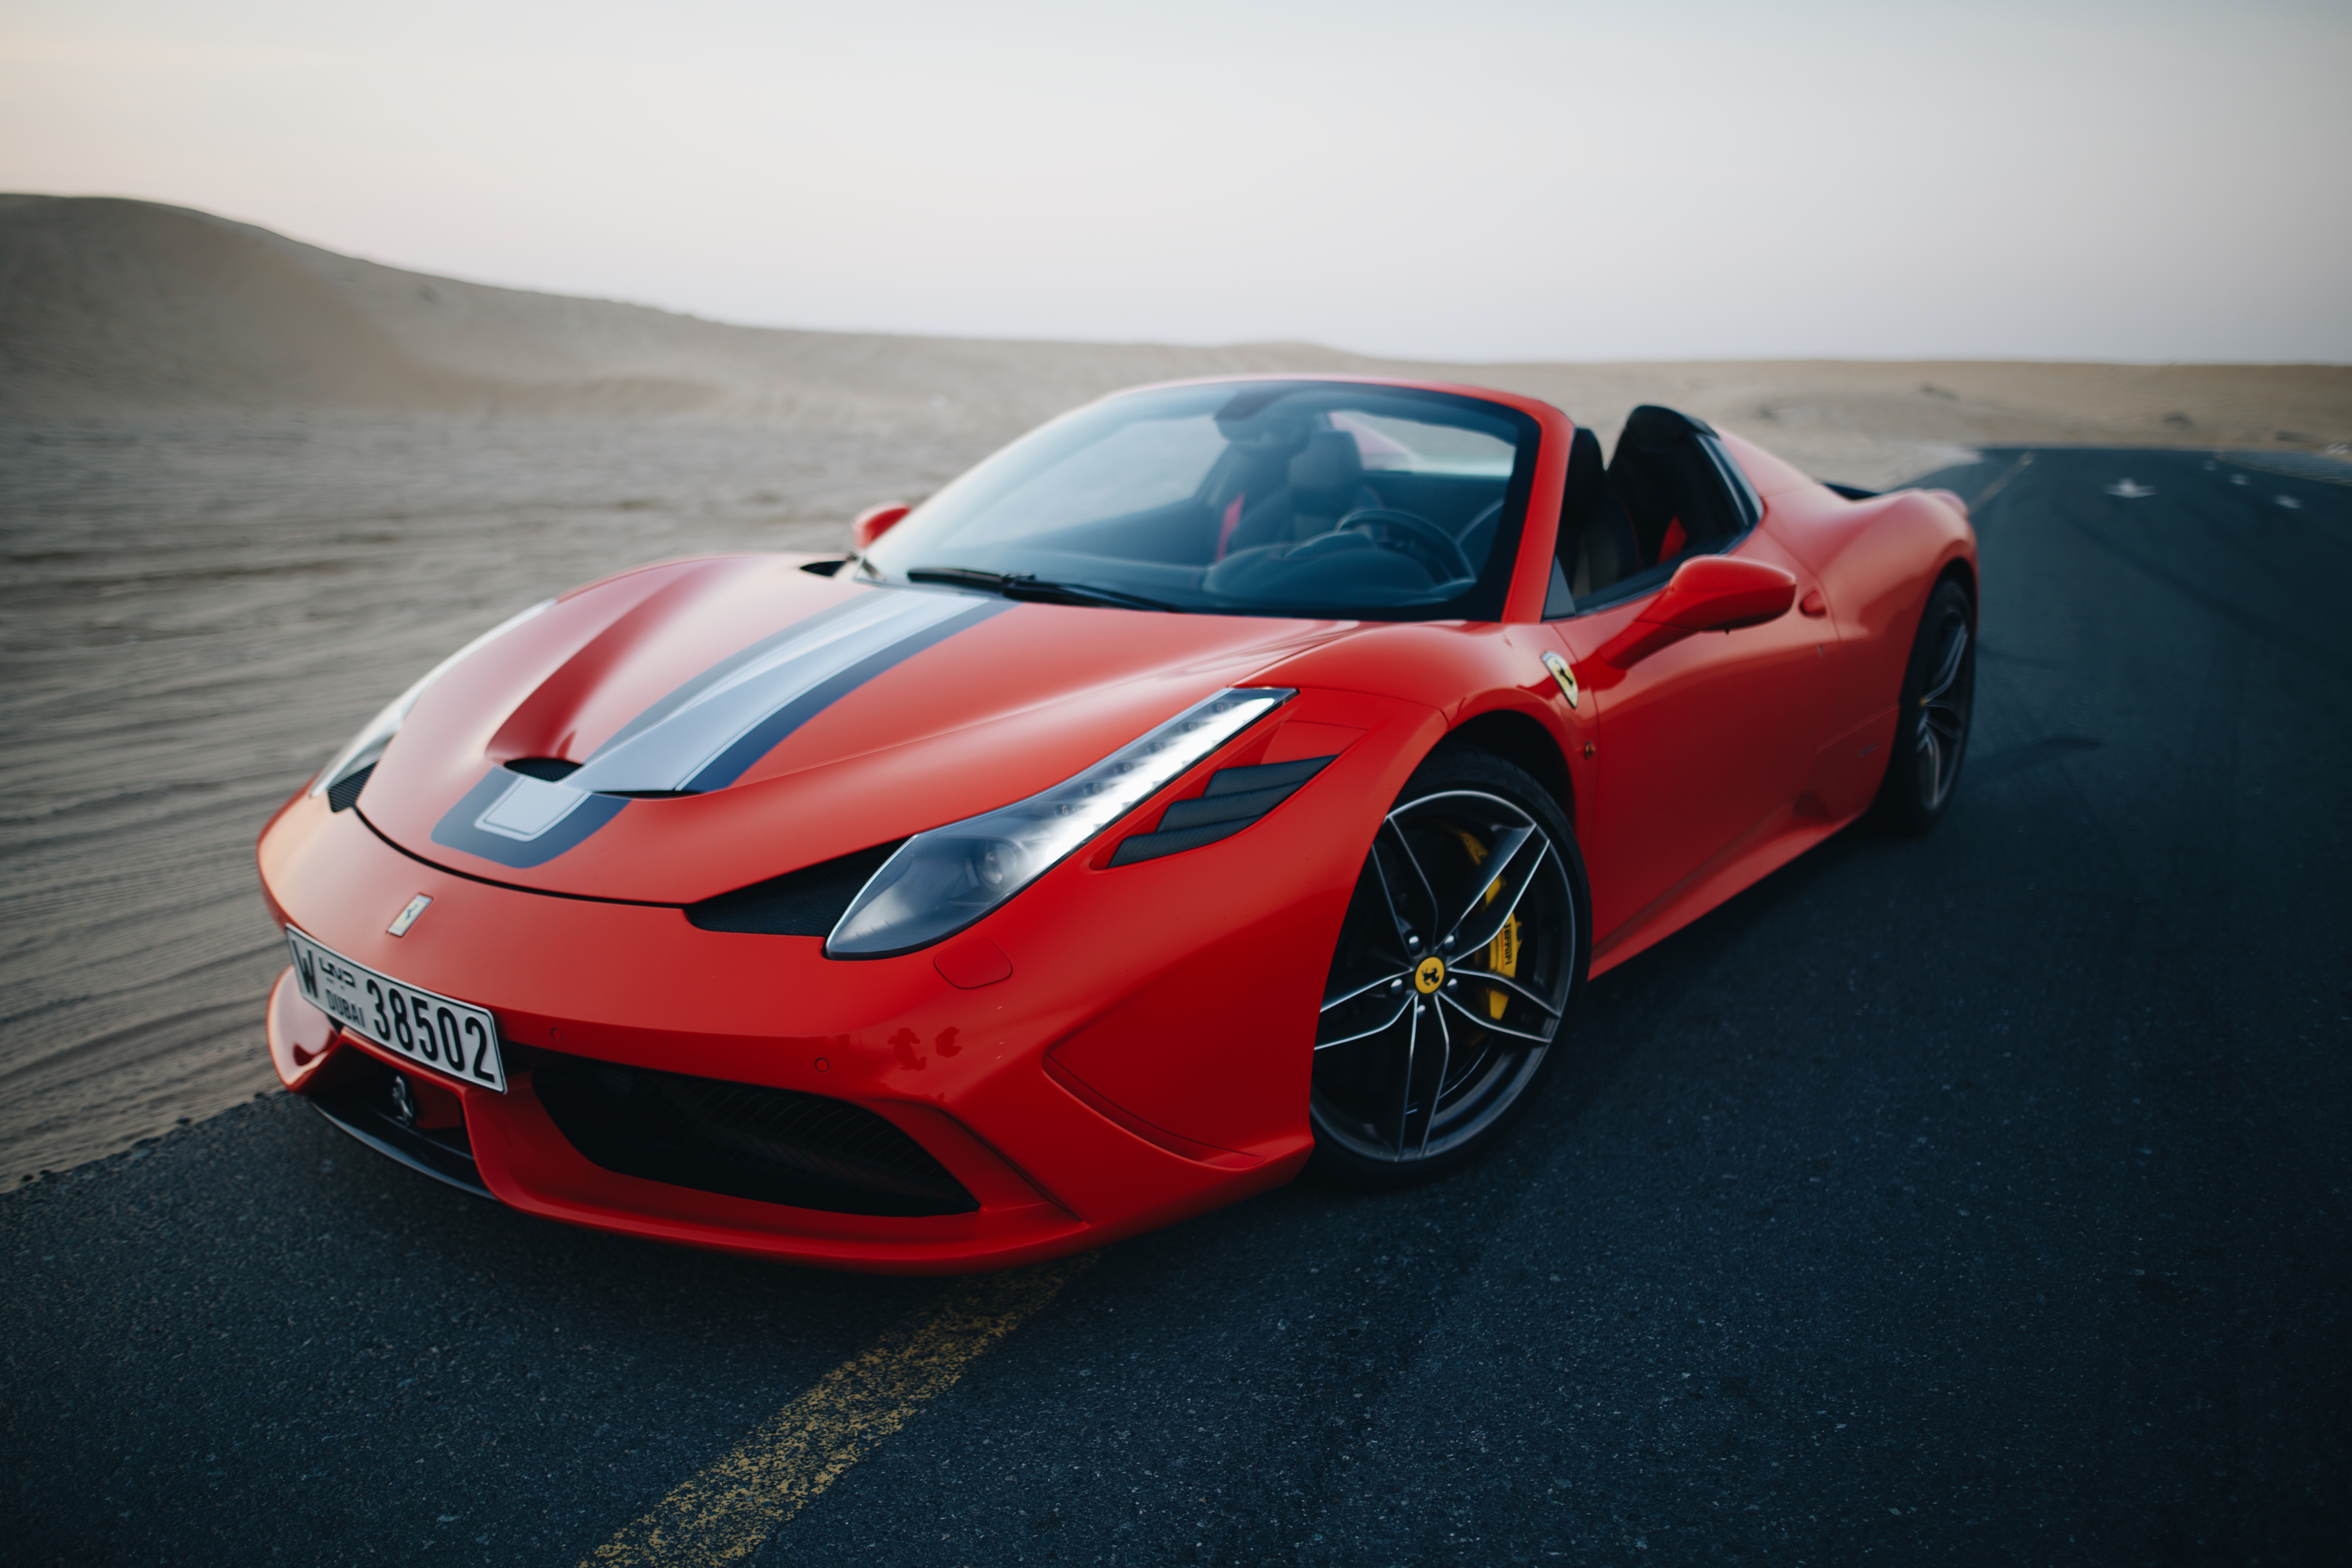 Ferrari 458 speciale in red with racing stripes